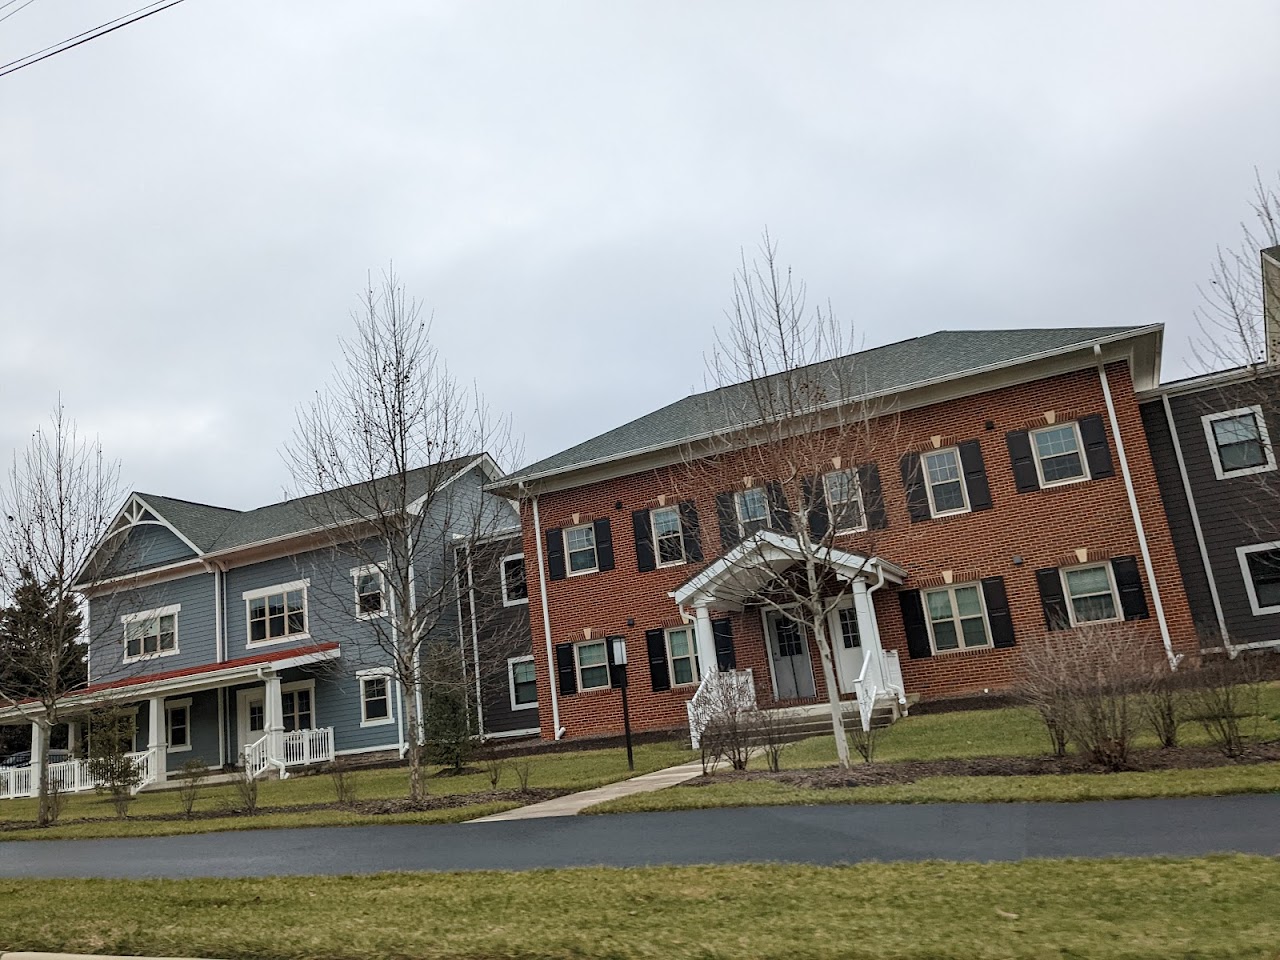 Photo of FALLSTEAD AT LEWINSVILLE SENIOR CENTER. Affordable housing located at 1609 GREAT FALLS STREET MCLEAN, VA 22101